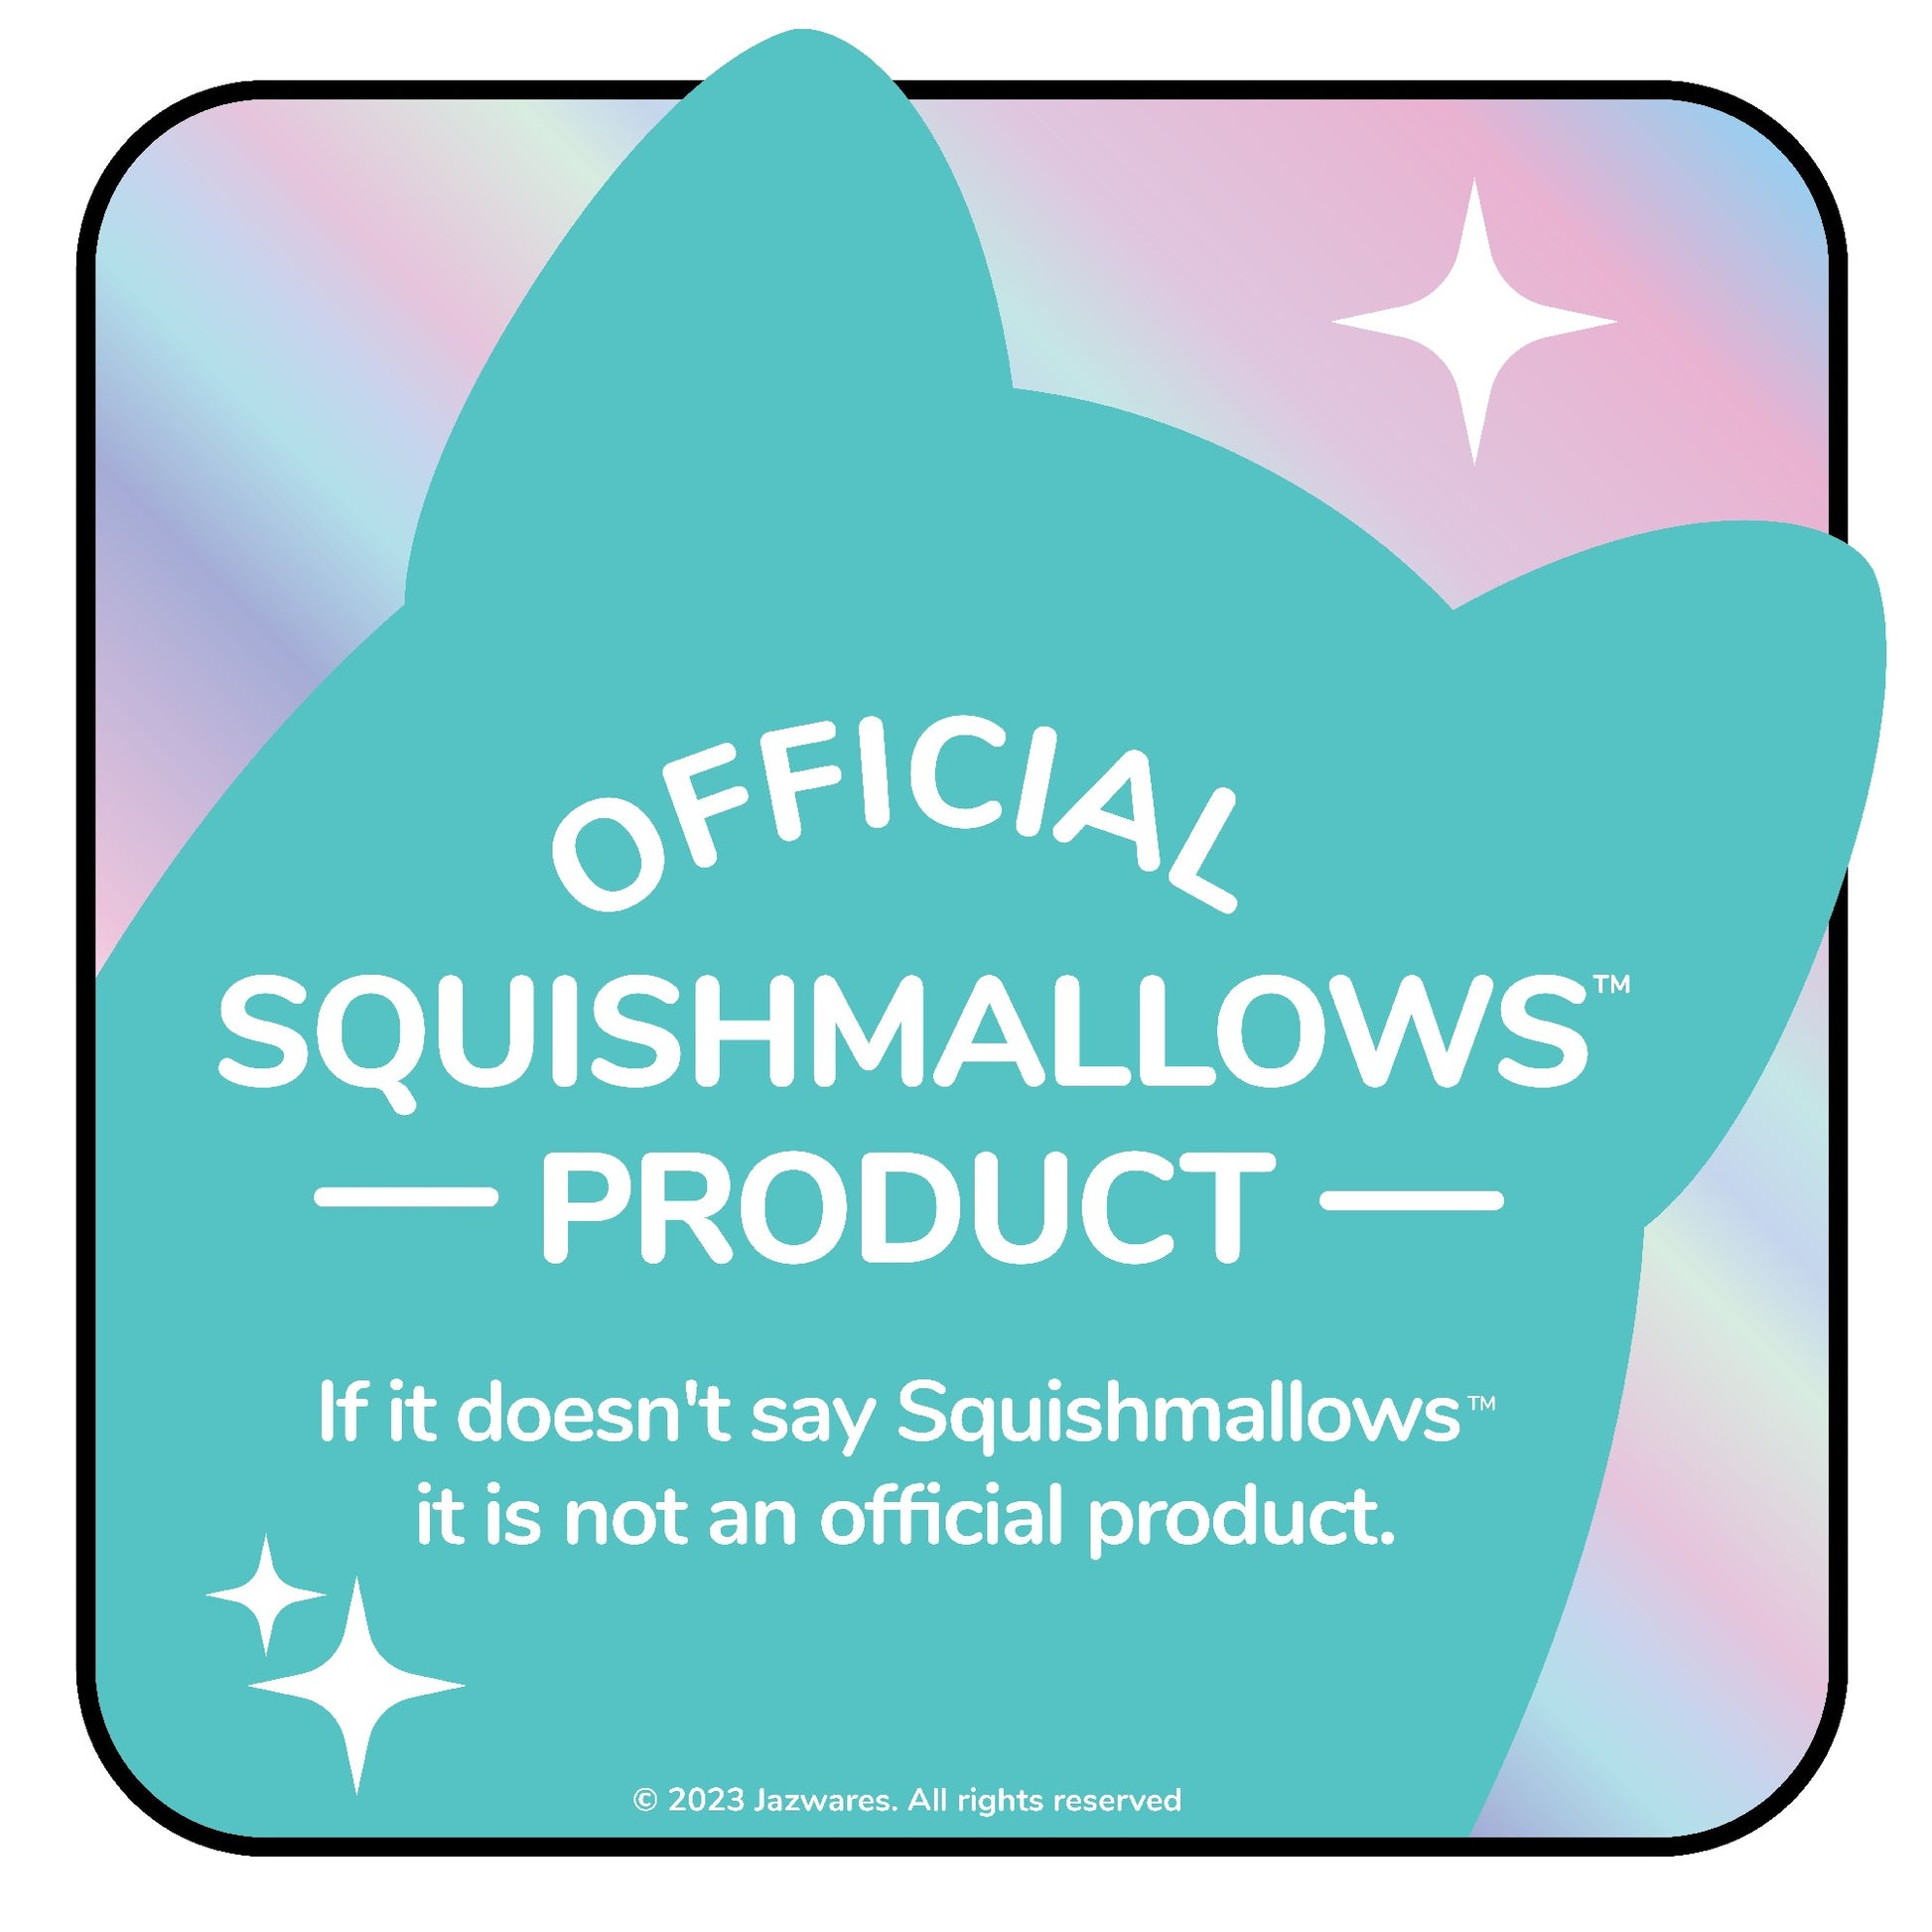 Squishmallows Sonic The Hedgehog Tails 8" Plush